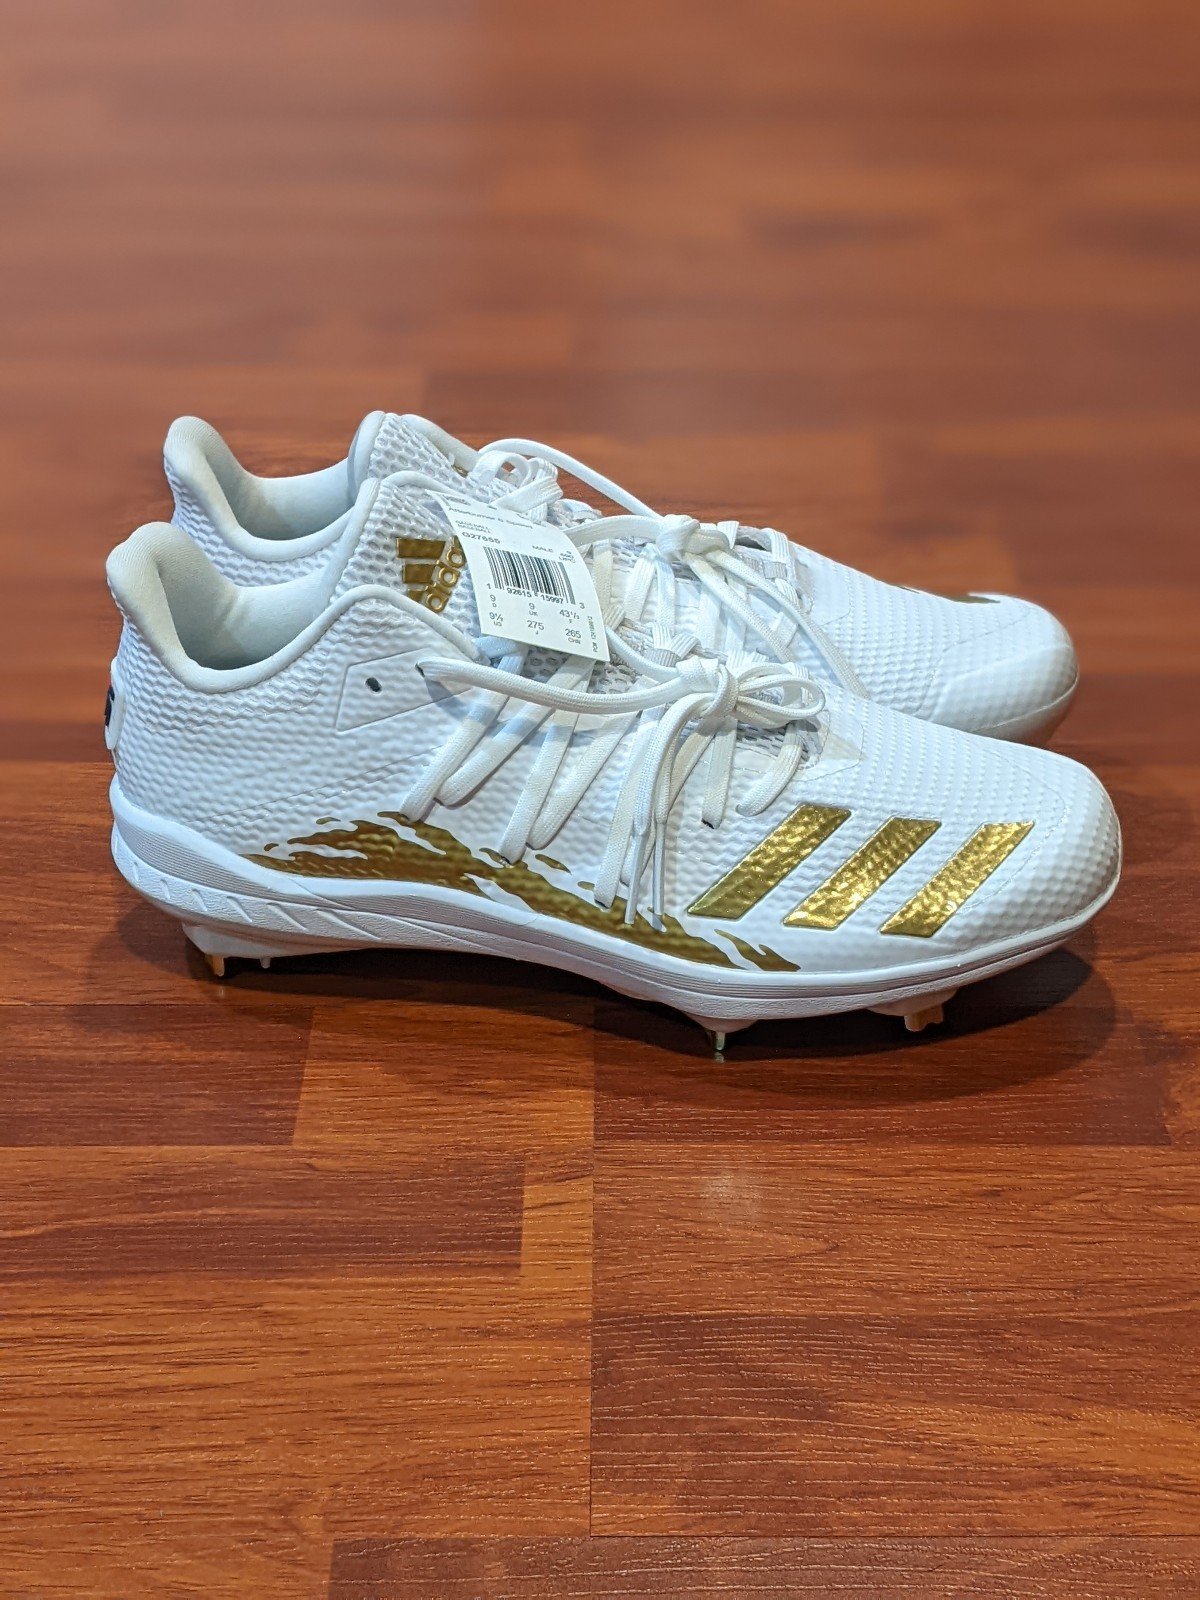 Adidas Afterburner 6 Speed Trap ´White Gold´ (size us mens 9.5) dOao6Cfkn